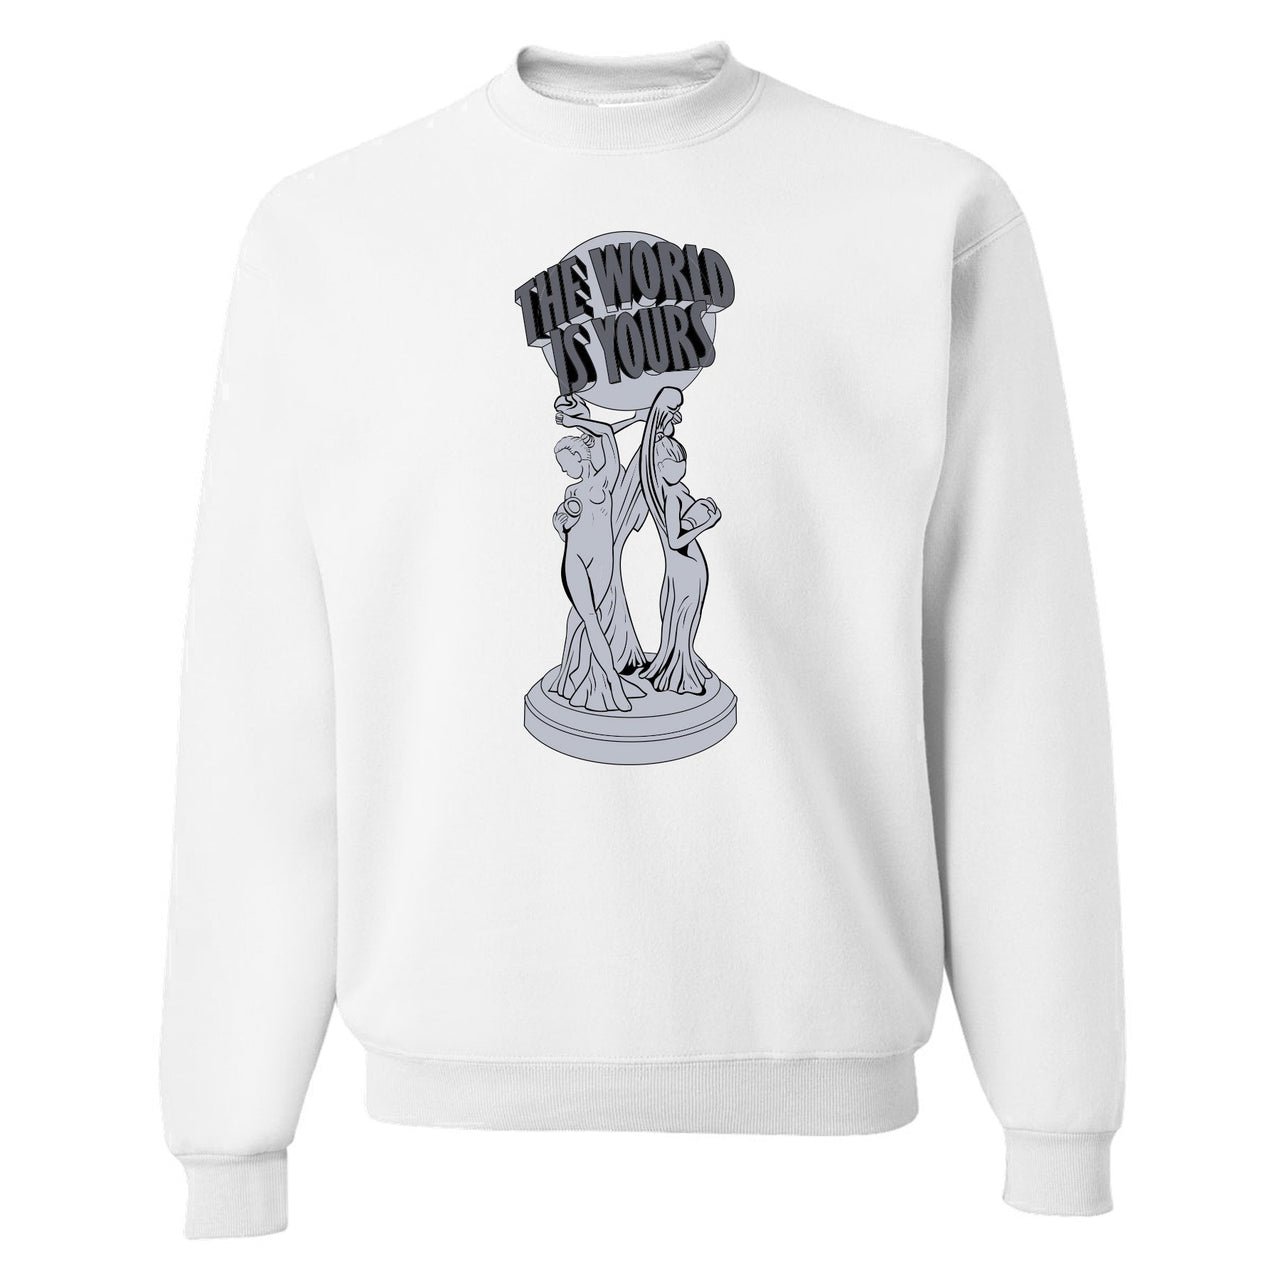 Analog 700s Crewneck Sweater | The World Is Yours, White